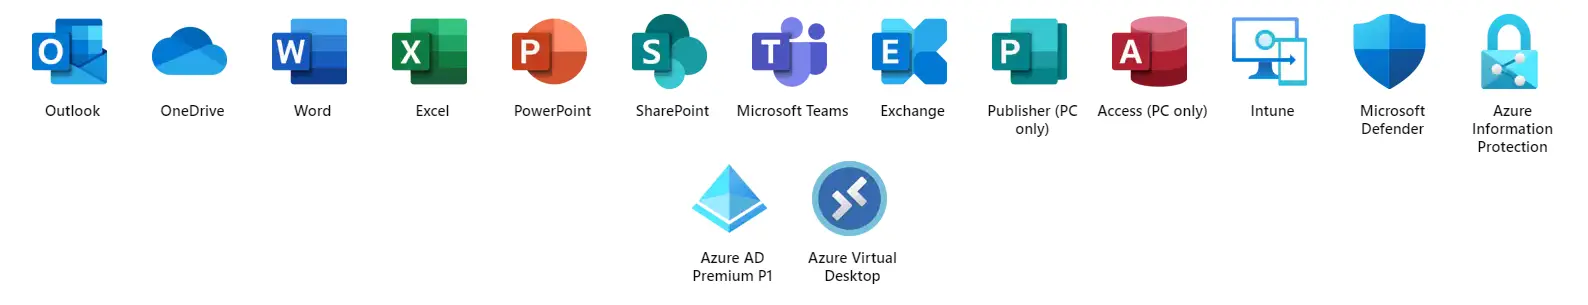 Microsoft 365 Business Premium Apps and services